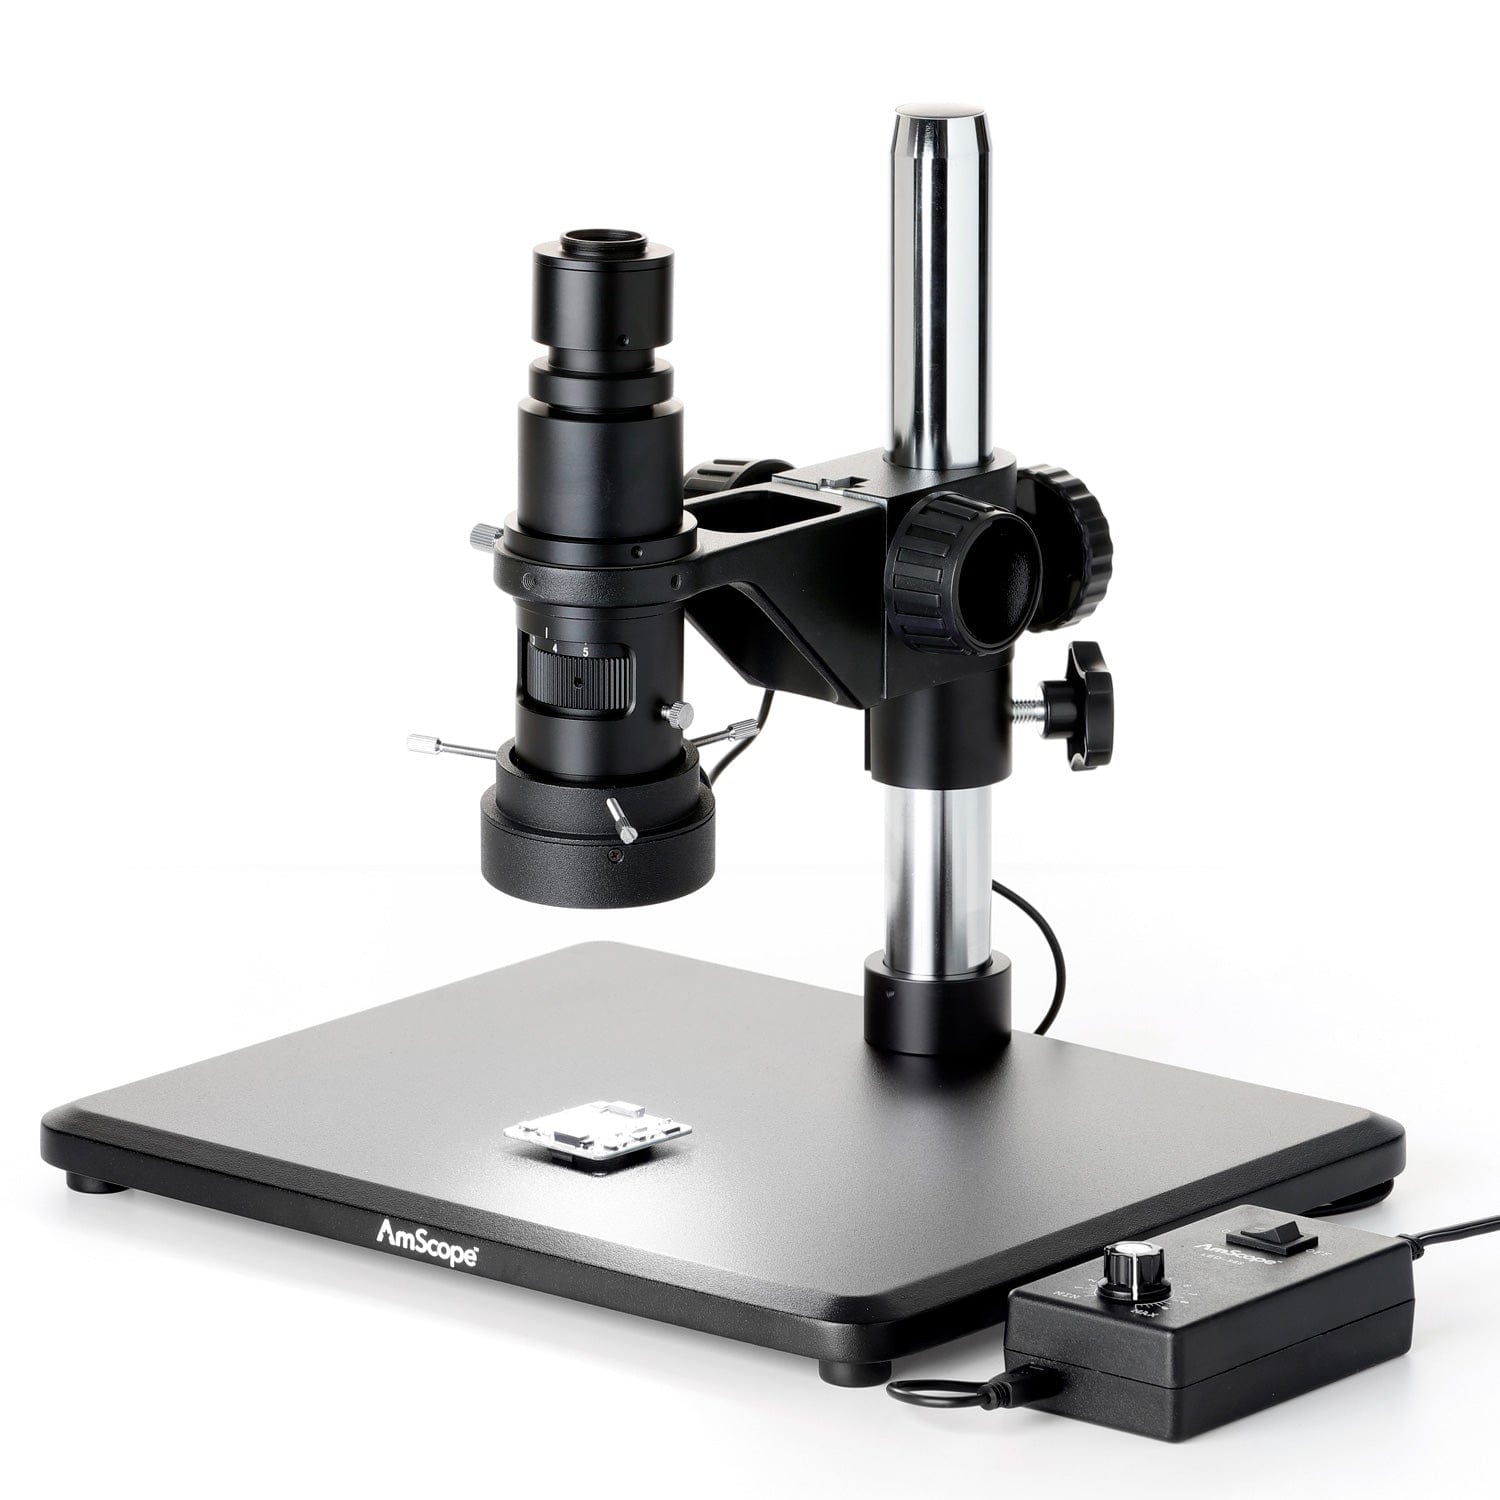 Variable power 60x-100x Bright LED Illuminated Micro Pocket Microscope with  adjustable focus, A high power ultra portable microscope